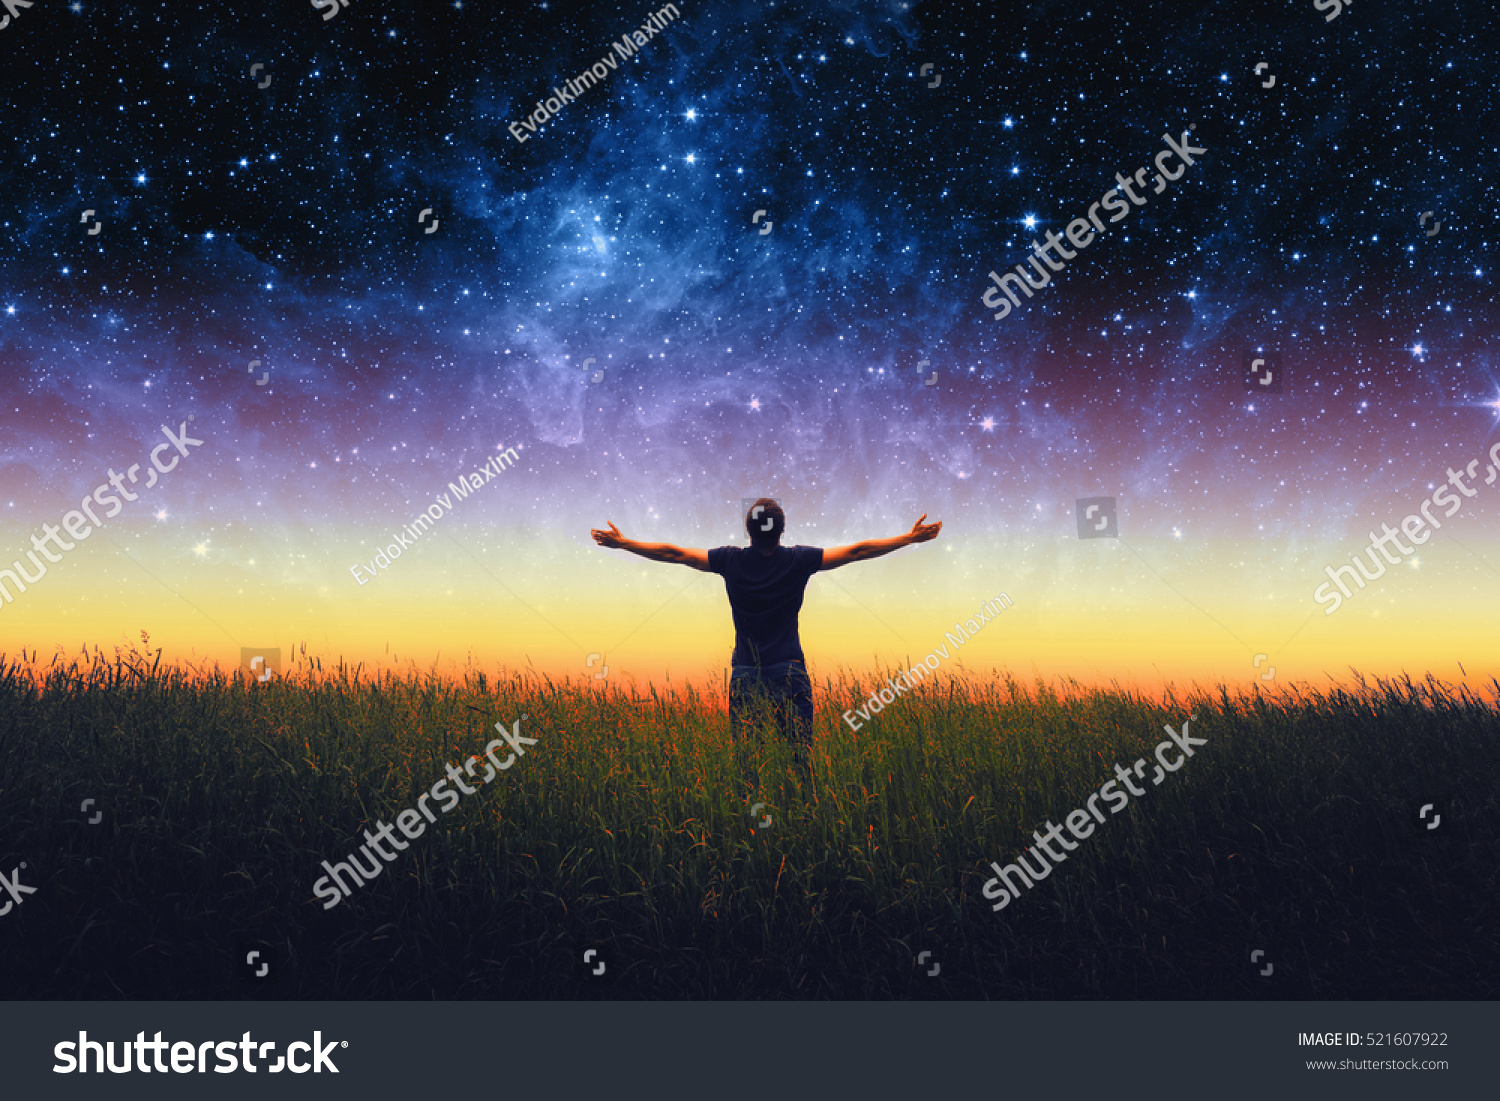 Silhouette of man and stars sky. Elements of this image furnished by NASA #521607922